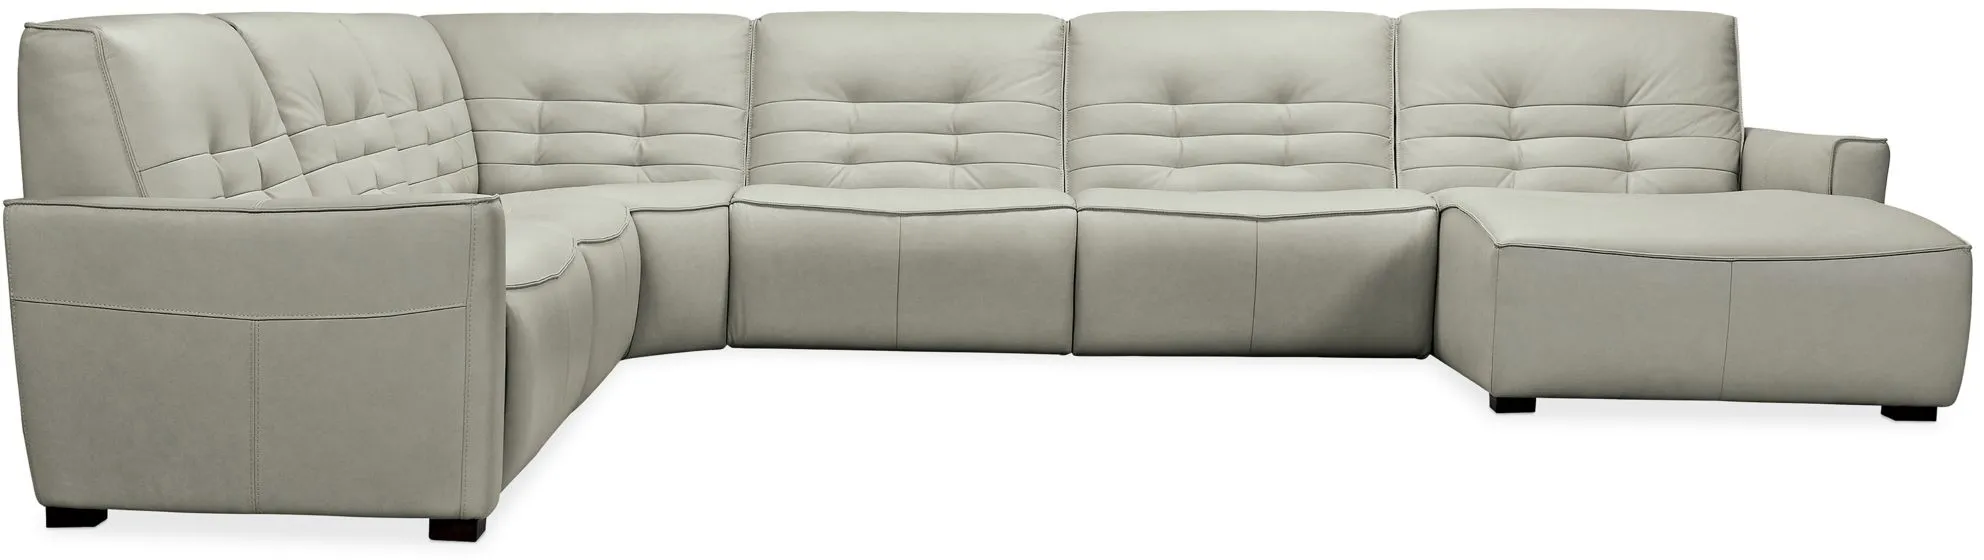 Hooker Furniture Corp. Reaux Power Reclining Sectional w/ Chaise in Grey by Hooker Furniture